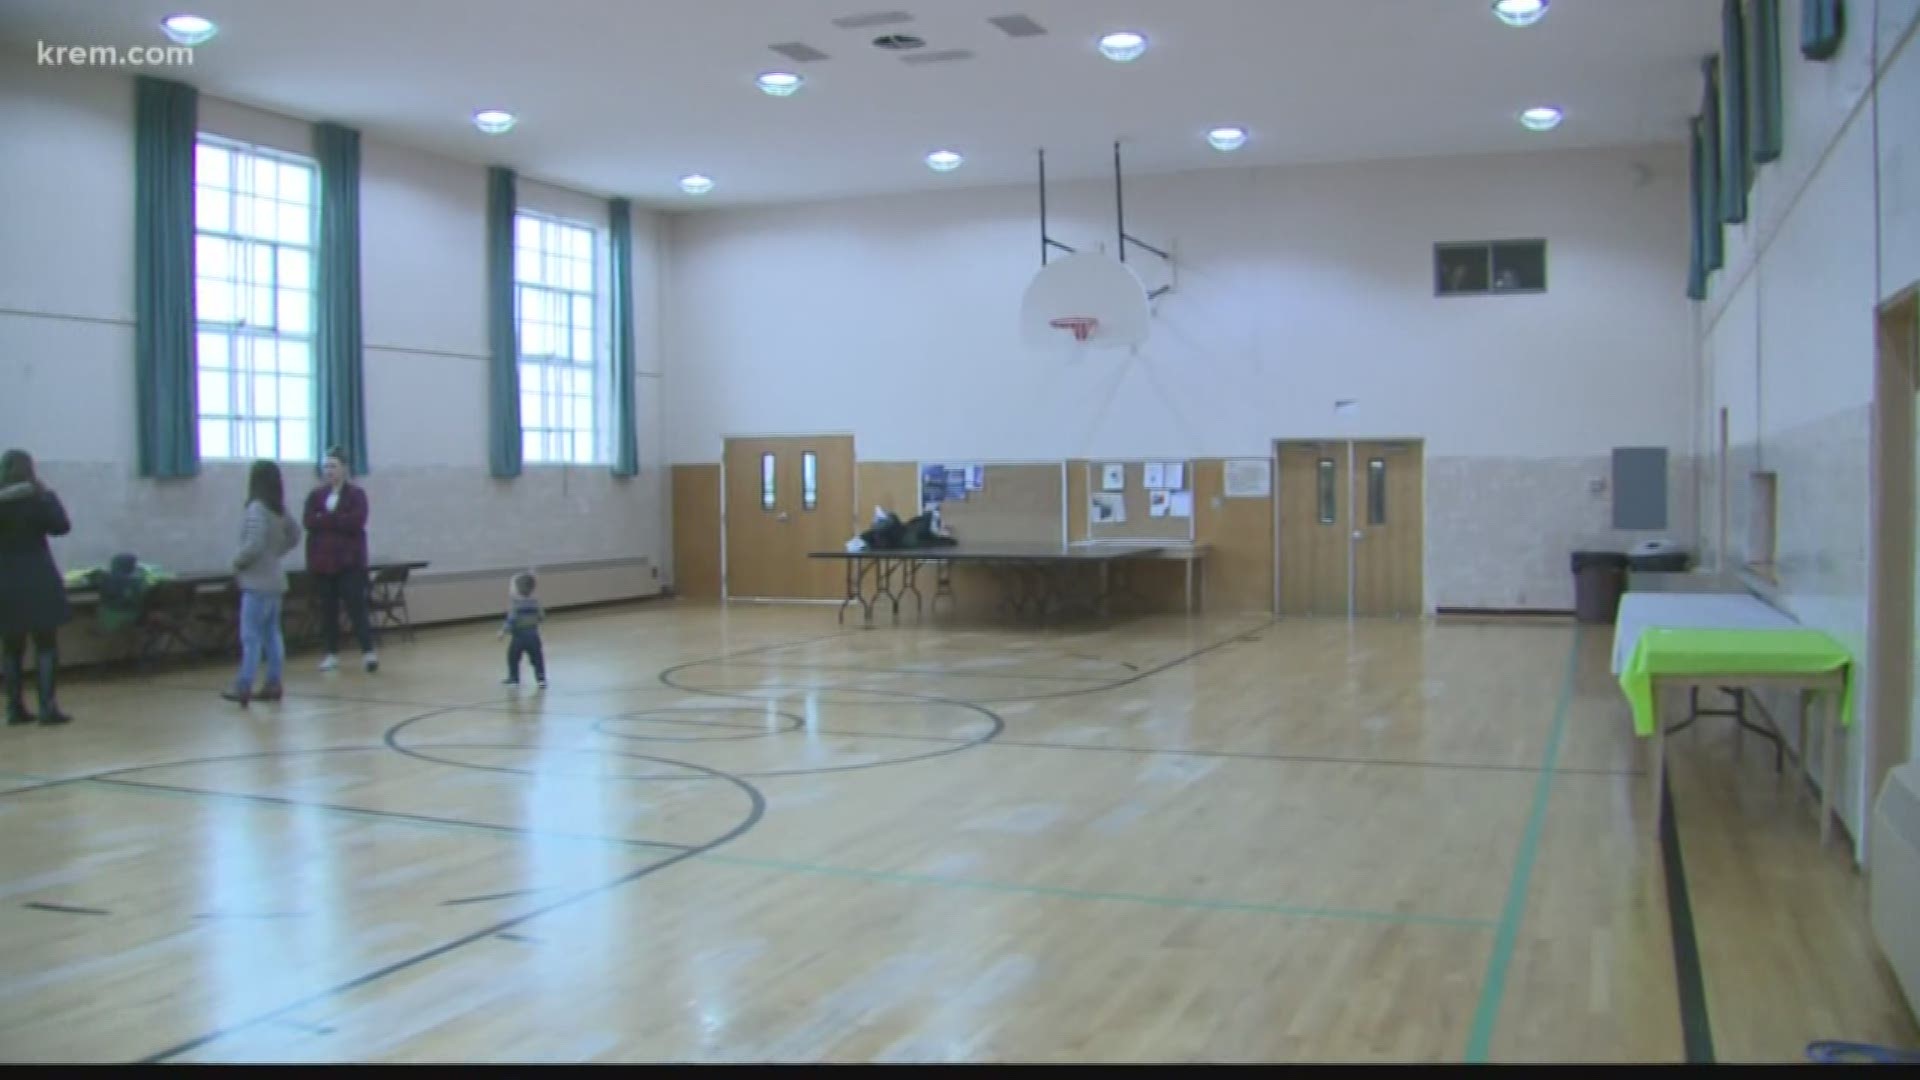 The city of Spokane approved another warming shelter contract to house men in need. The contract originally provided 40 spaces but a local church decided to instead open up its gym, allowing for 60 spaces.